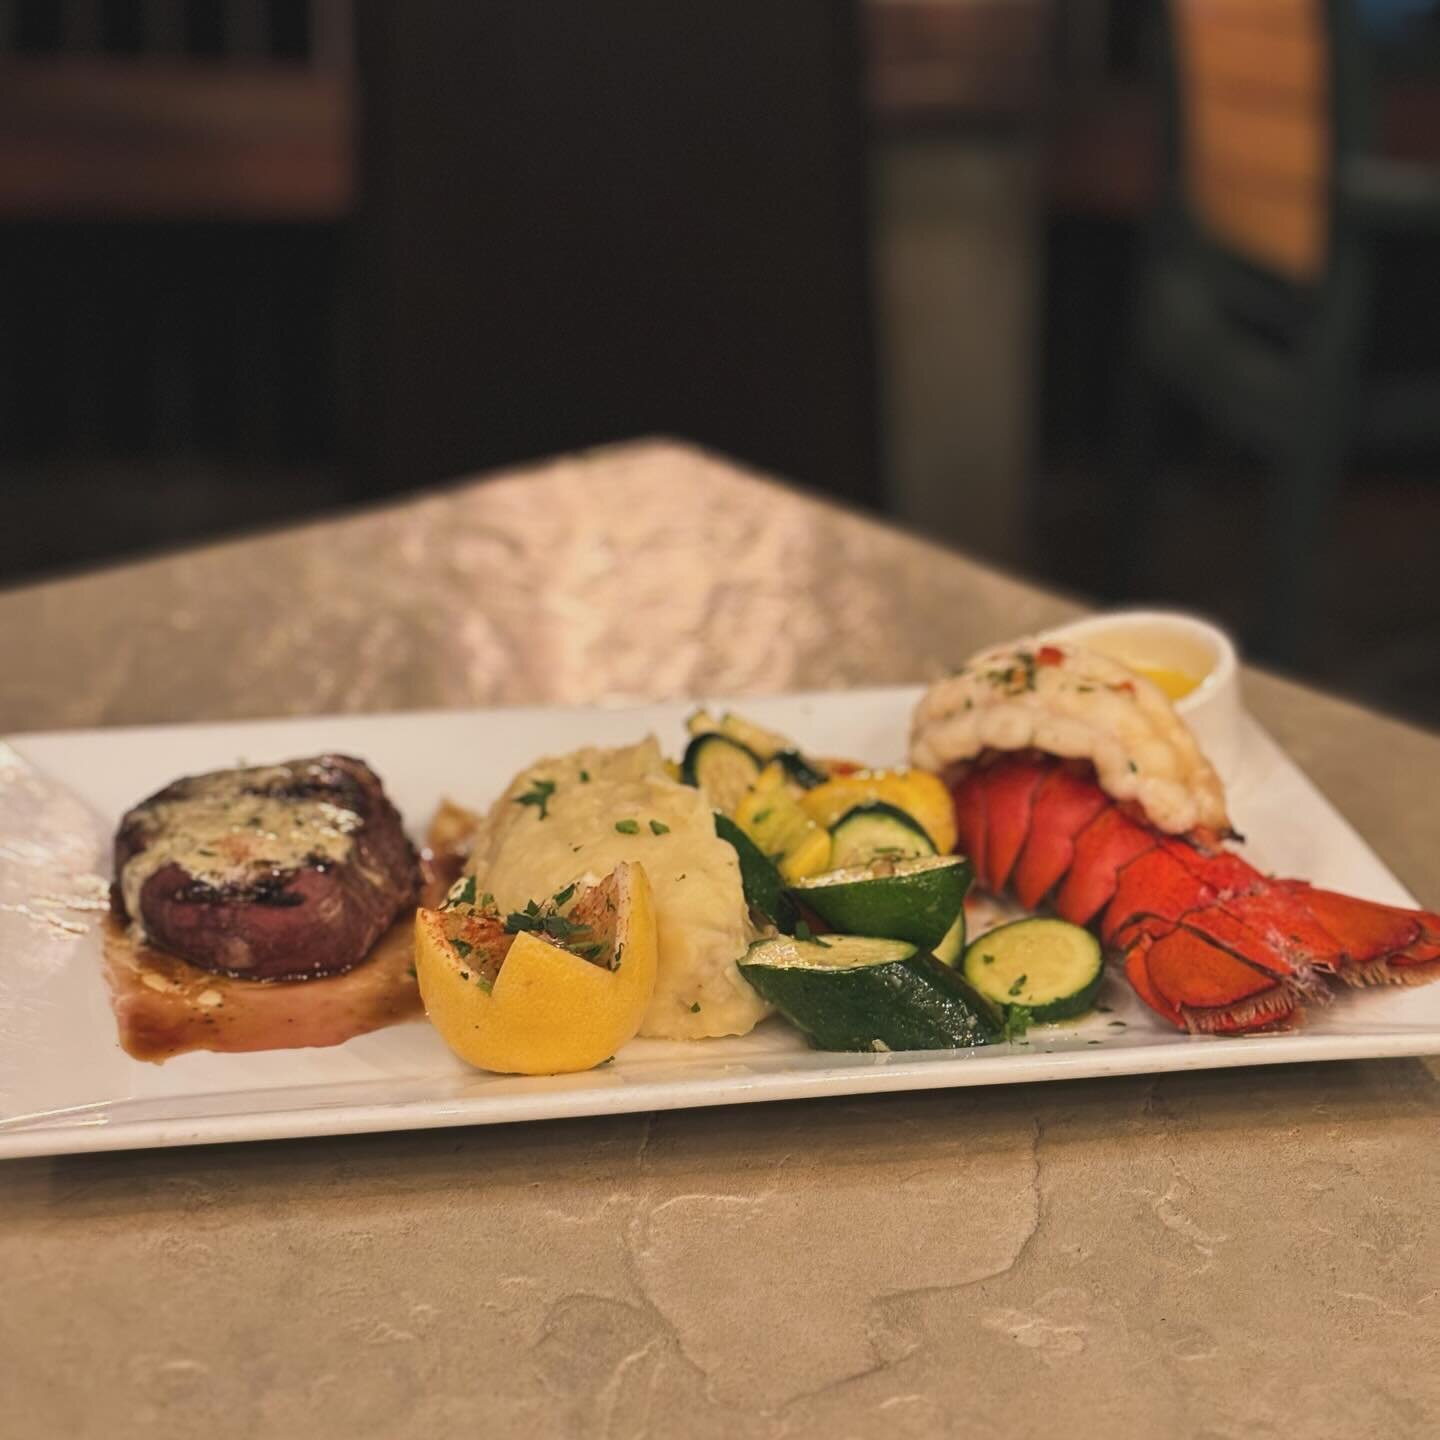 Wednesday night is Surf &amp; Turf night! 🦞 5oz Filet Mignon &amp; 6oz Canadian Lobster tail with mashed and veggies $34.95 #paradisebeachgrillecapitola #surf&amp;turf #dinnerspecial